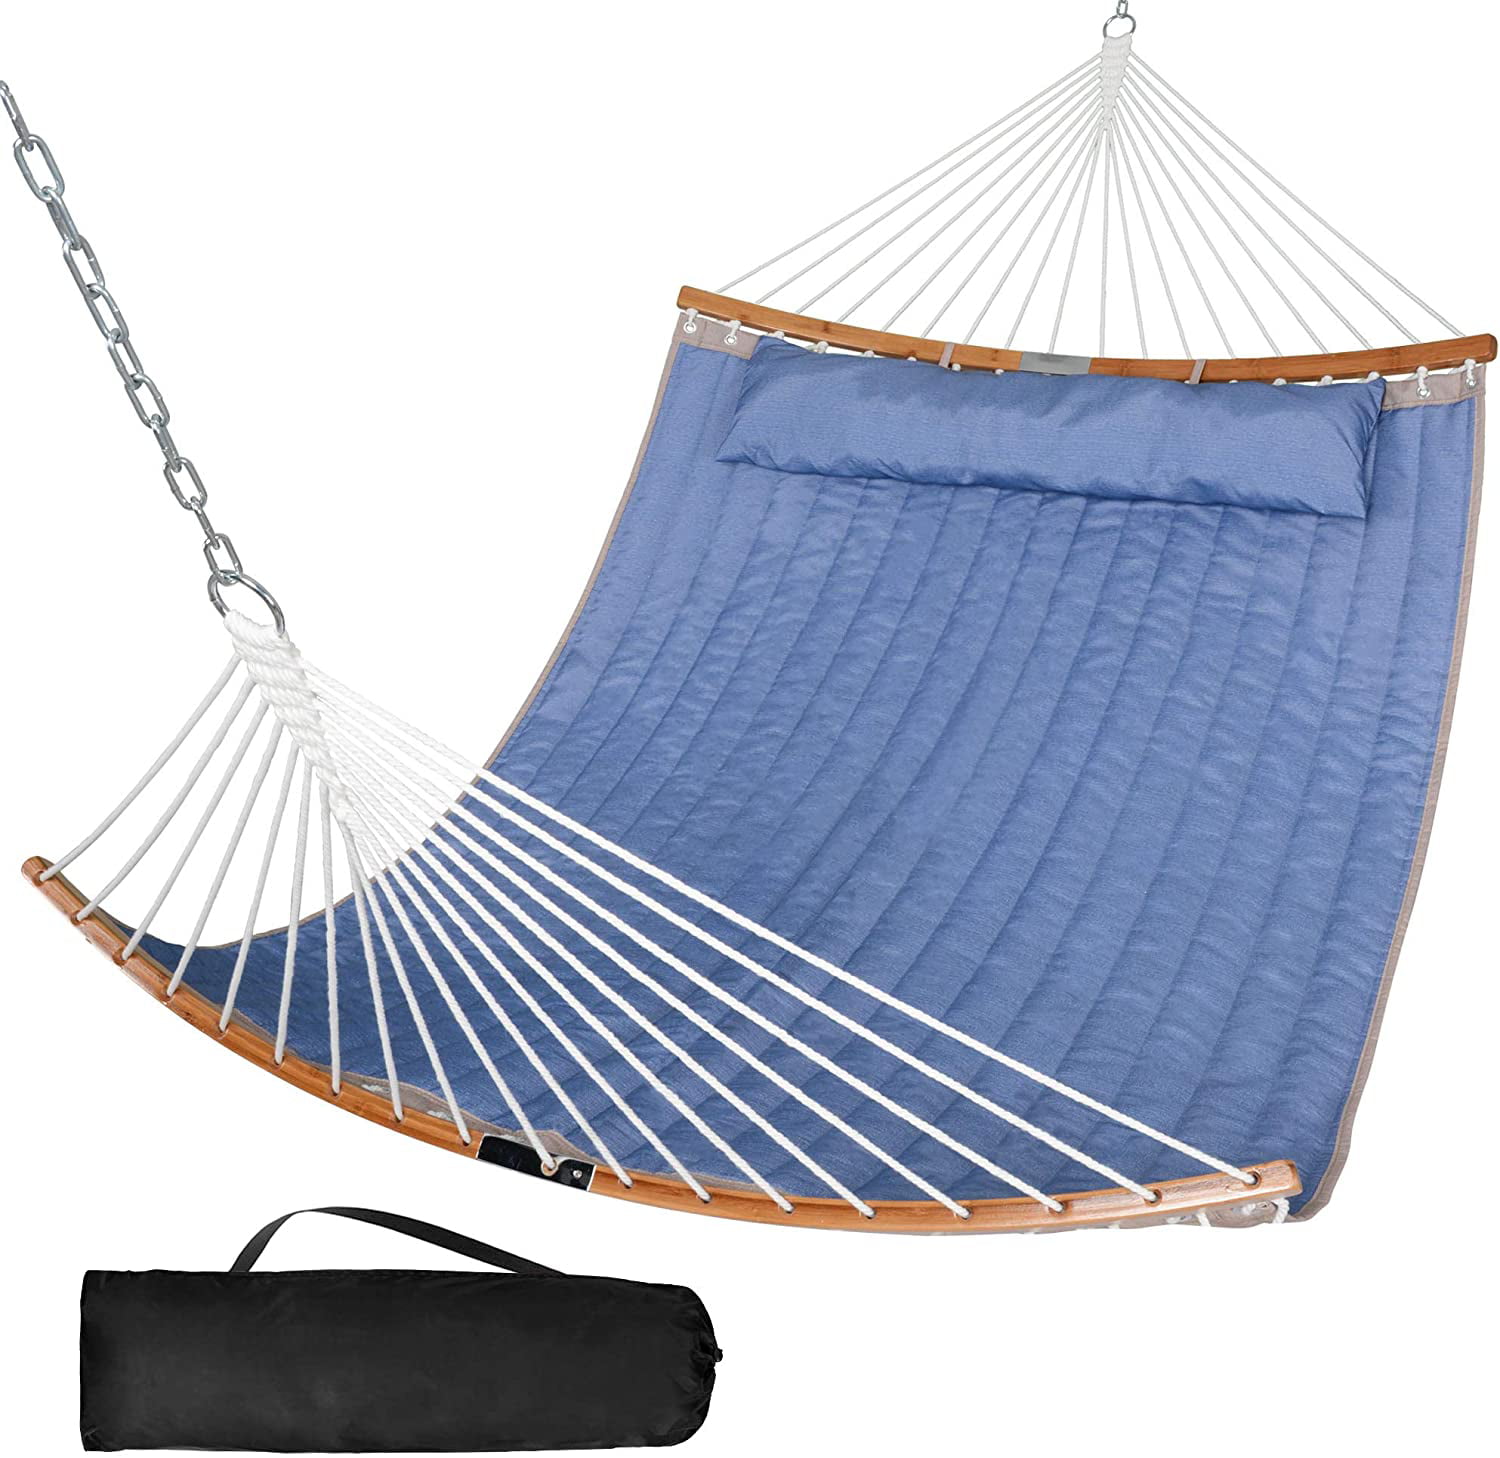 Patio Watcher 14 FT Quick Dry Hammock Folding Curved Bamboo Spreader Bar Portable Hammock for Camping Outdoor Patio Yard 